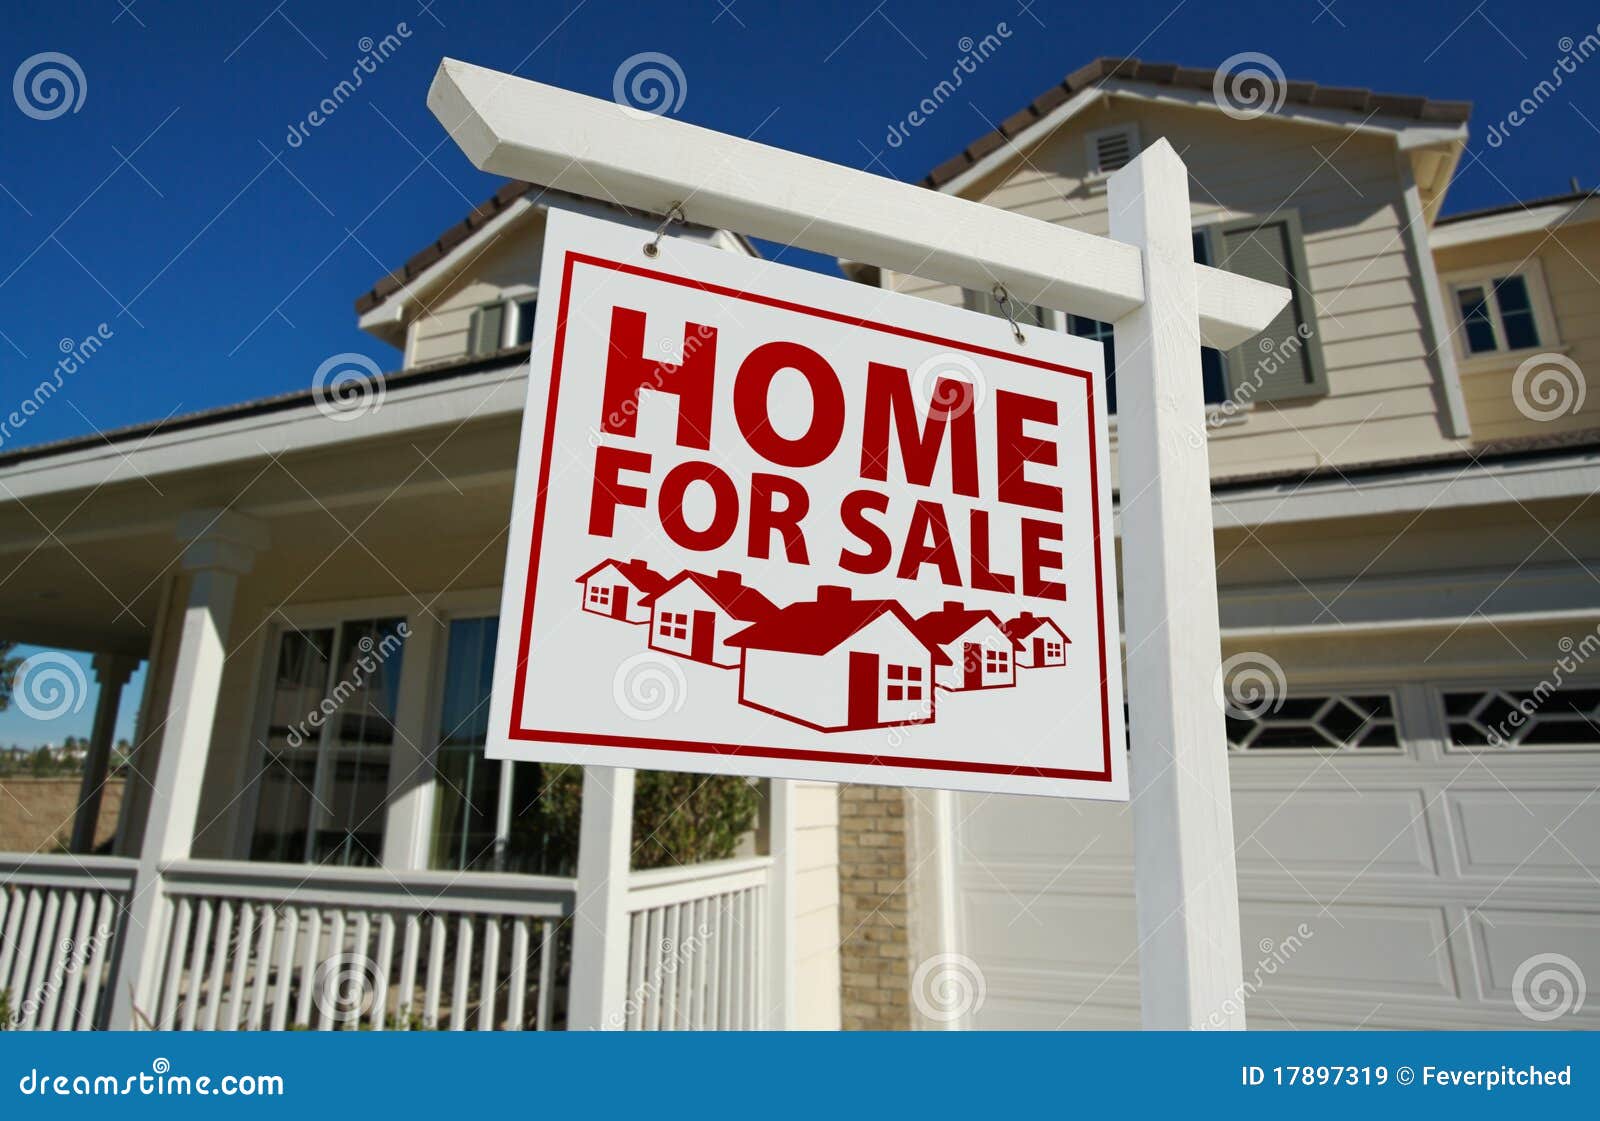 Red Home For Sale Real Estate Sign And House Stock Image - Image: 17897319